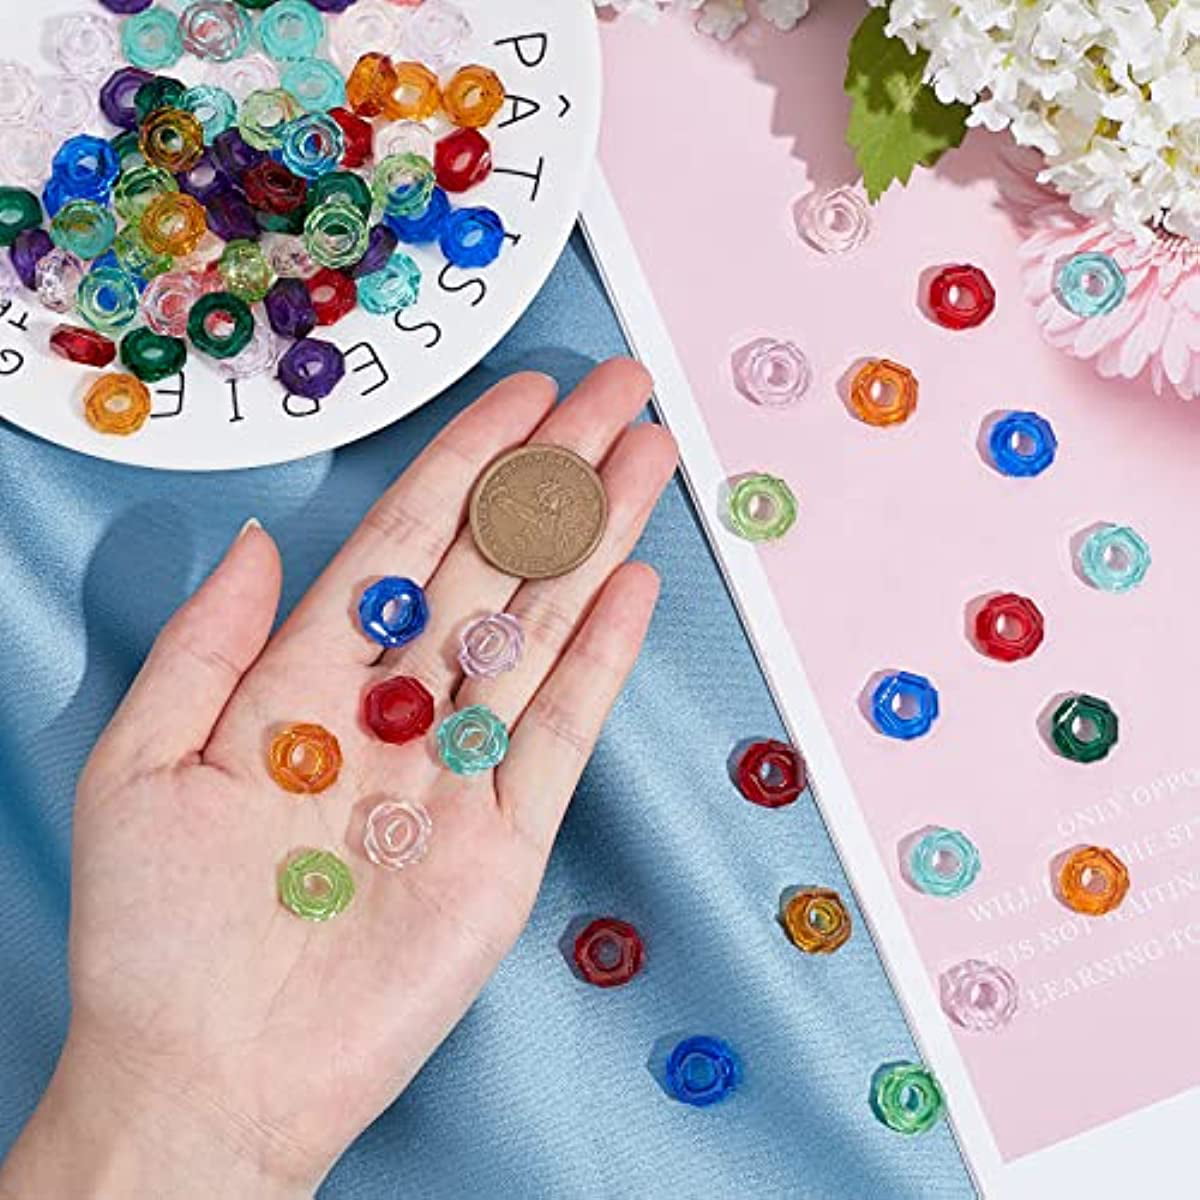 SUNNYCLUE 1 Box 100Pcs 10 Colors European Beads Resin Large Hole Spacer  Beads Rondelle Rhinestone Charms Beads for DIY Bracelet Jewelry Making  Craft, 14mm in Diameter, 9mm Thick, Hole: 5mm 